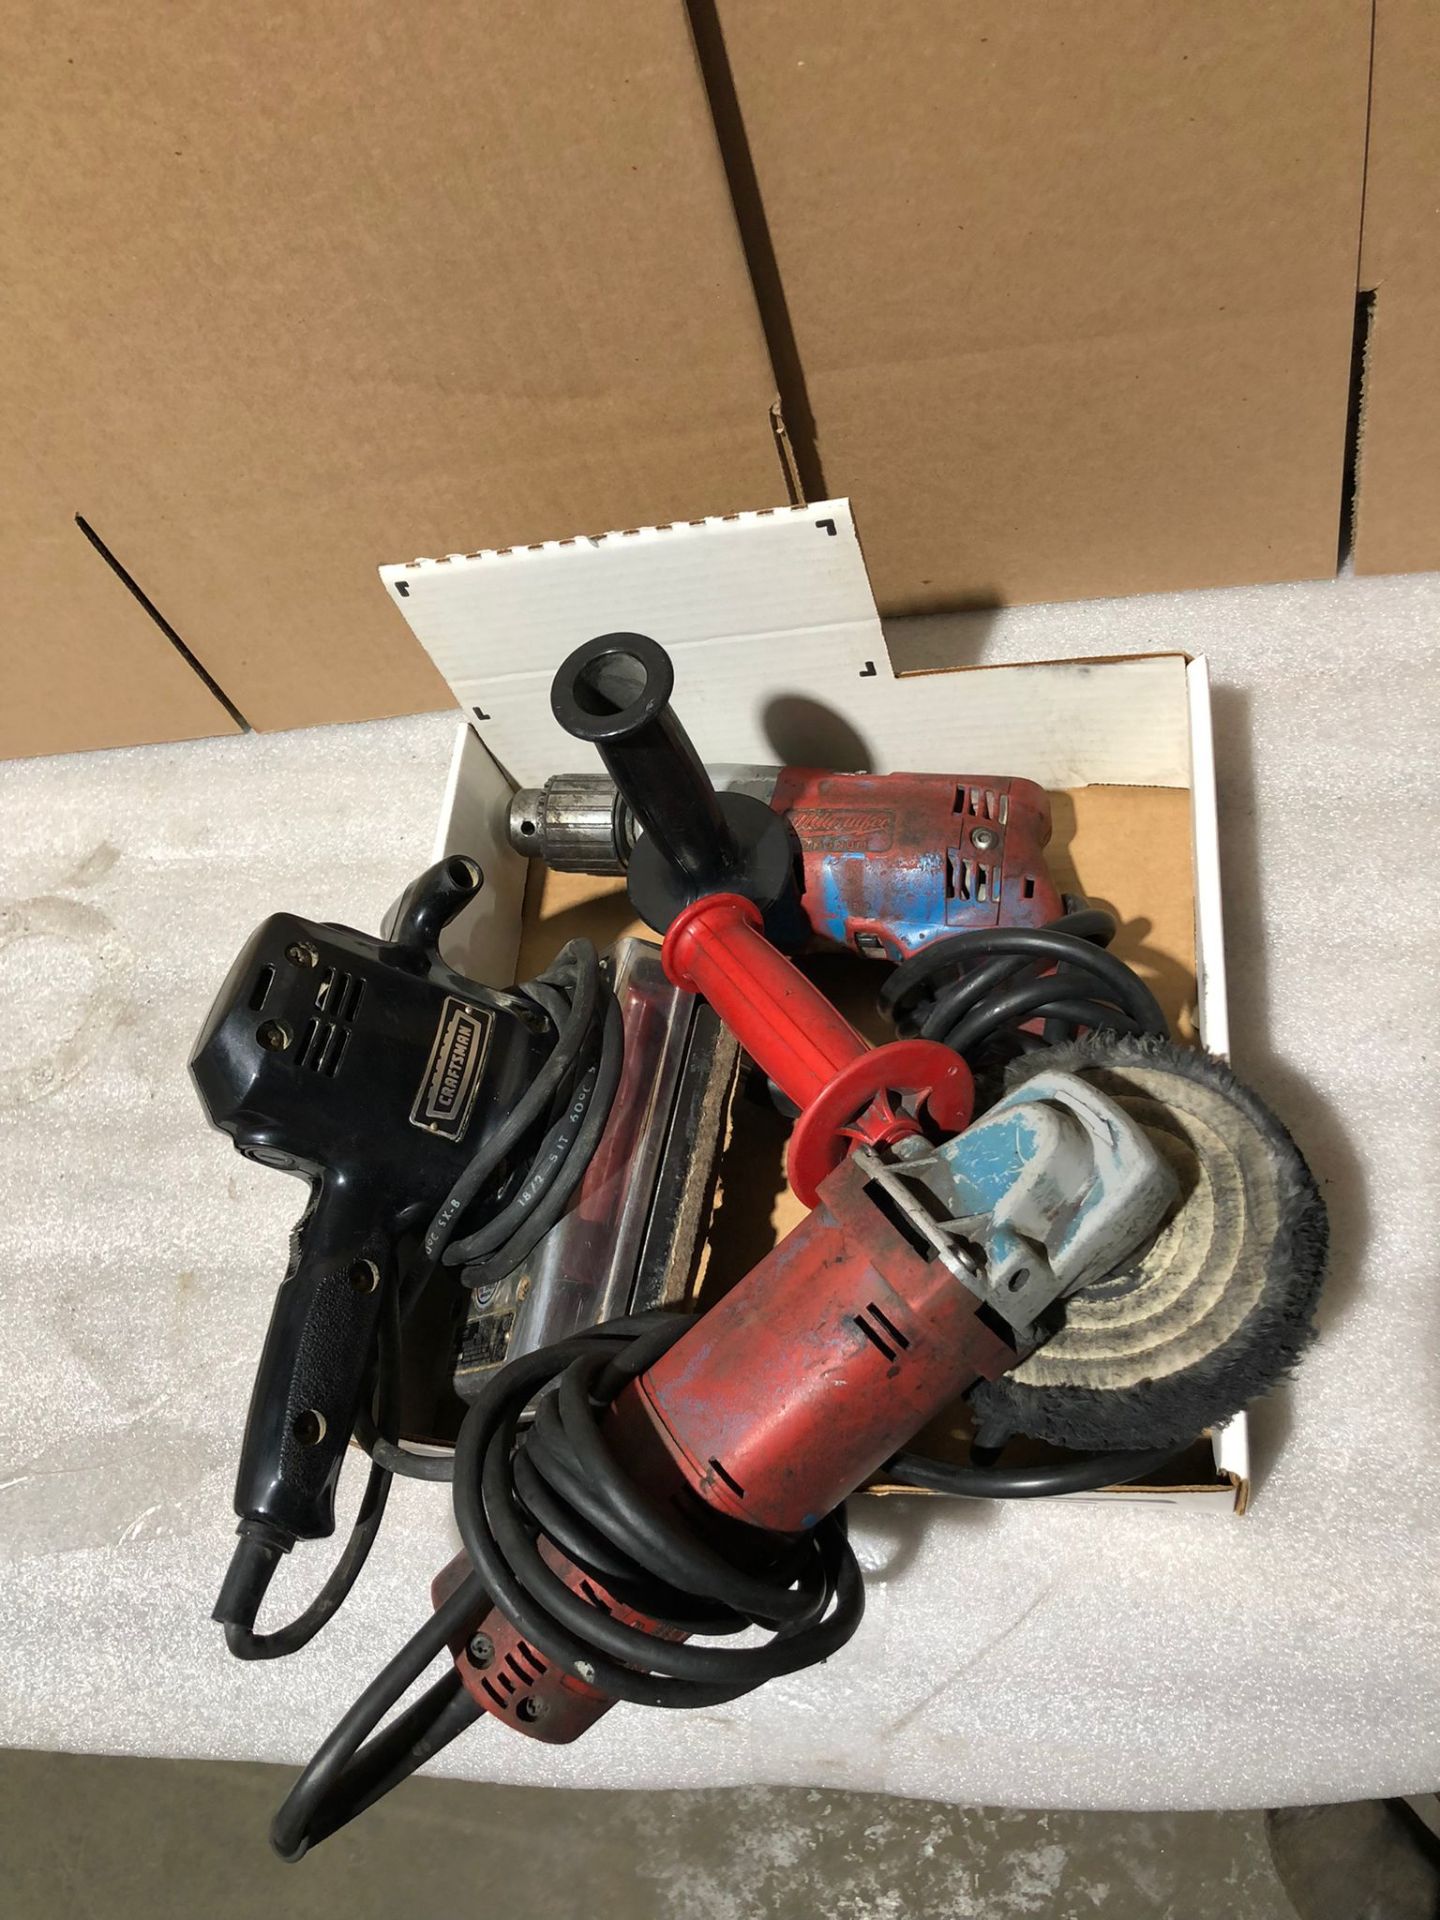 Lot of 3 (3 units) Hand tools - Drill, Grinder and Sander Milwaukee Units *** FROM 5-STAR RIGGING